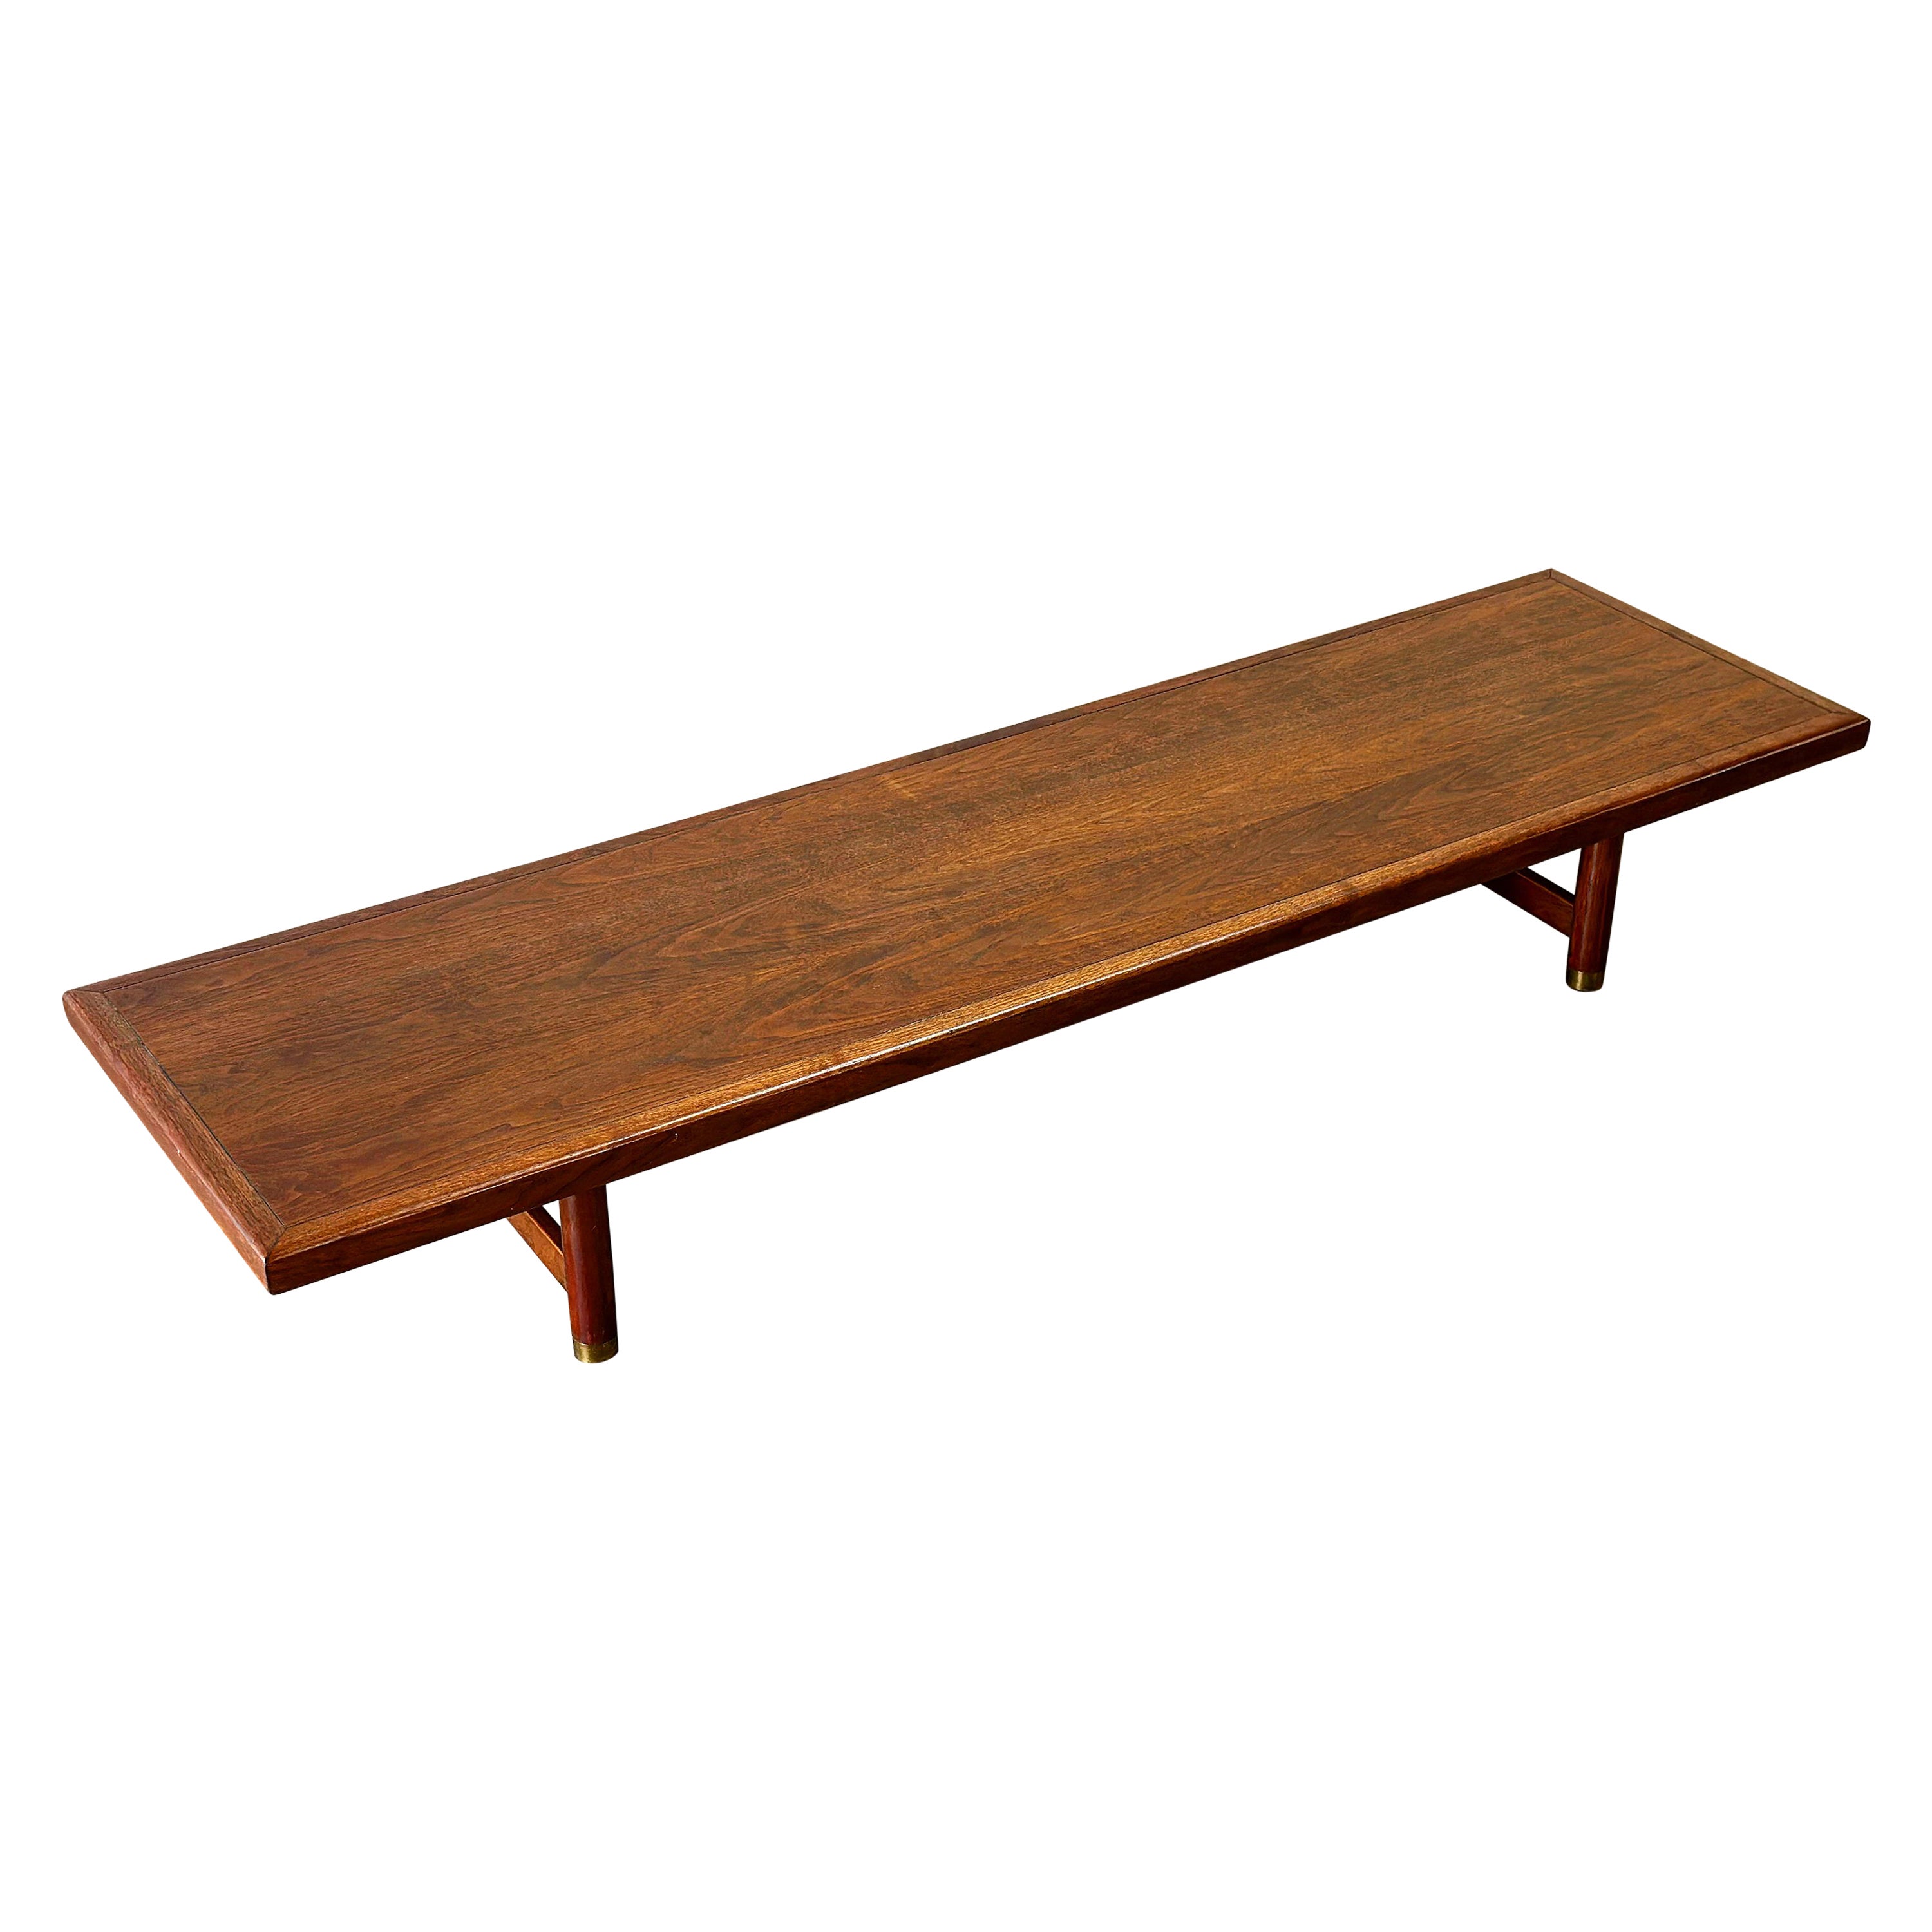 Midcentury Low Long Coffee Table or Bench, Walnut + Brass - Gordon's For Sale